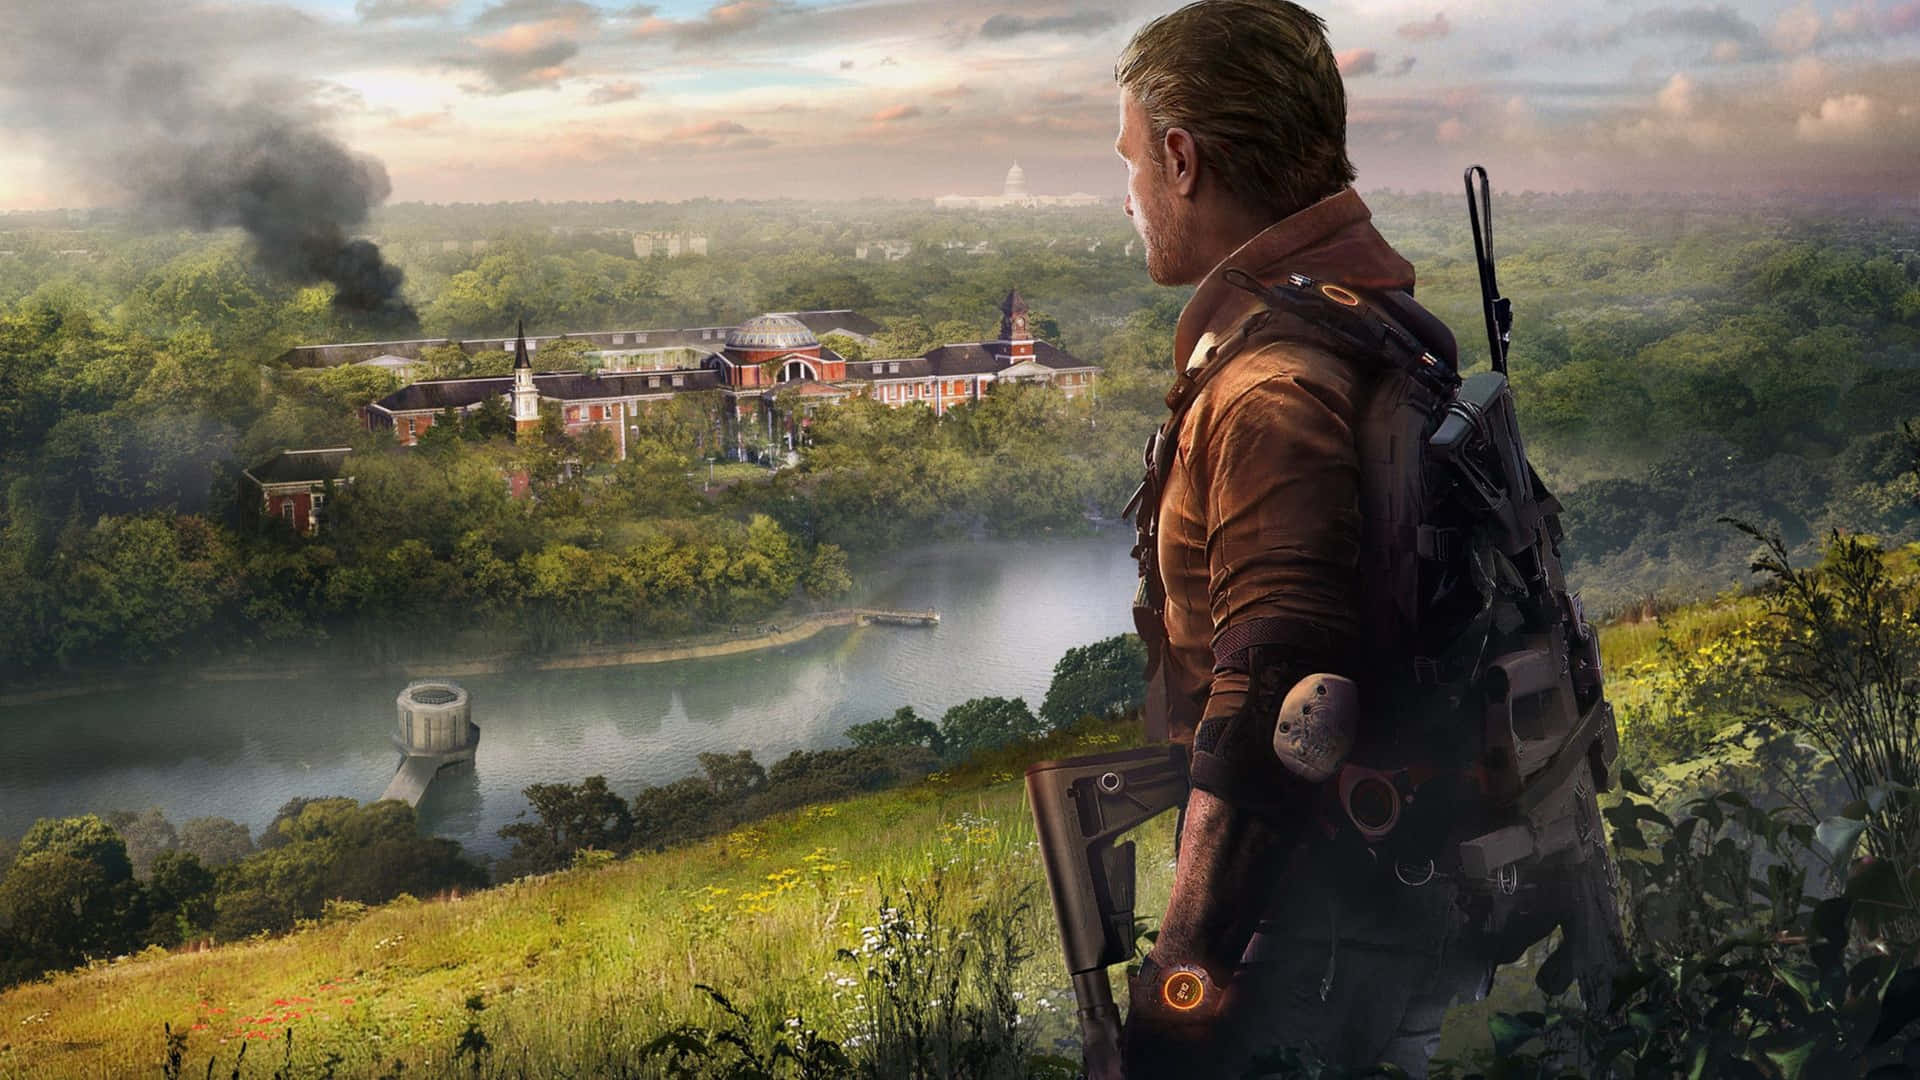 Explore Washington D.C. with The Division 2 in 4K Wallpaper